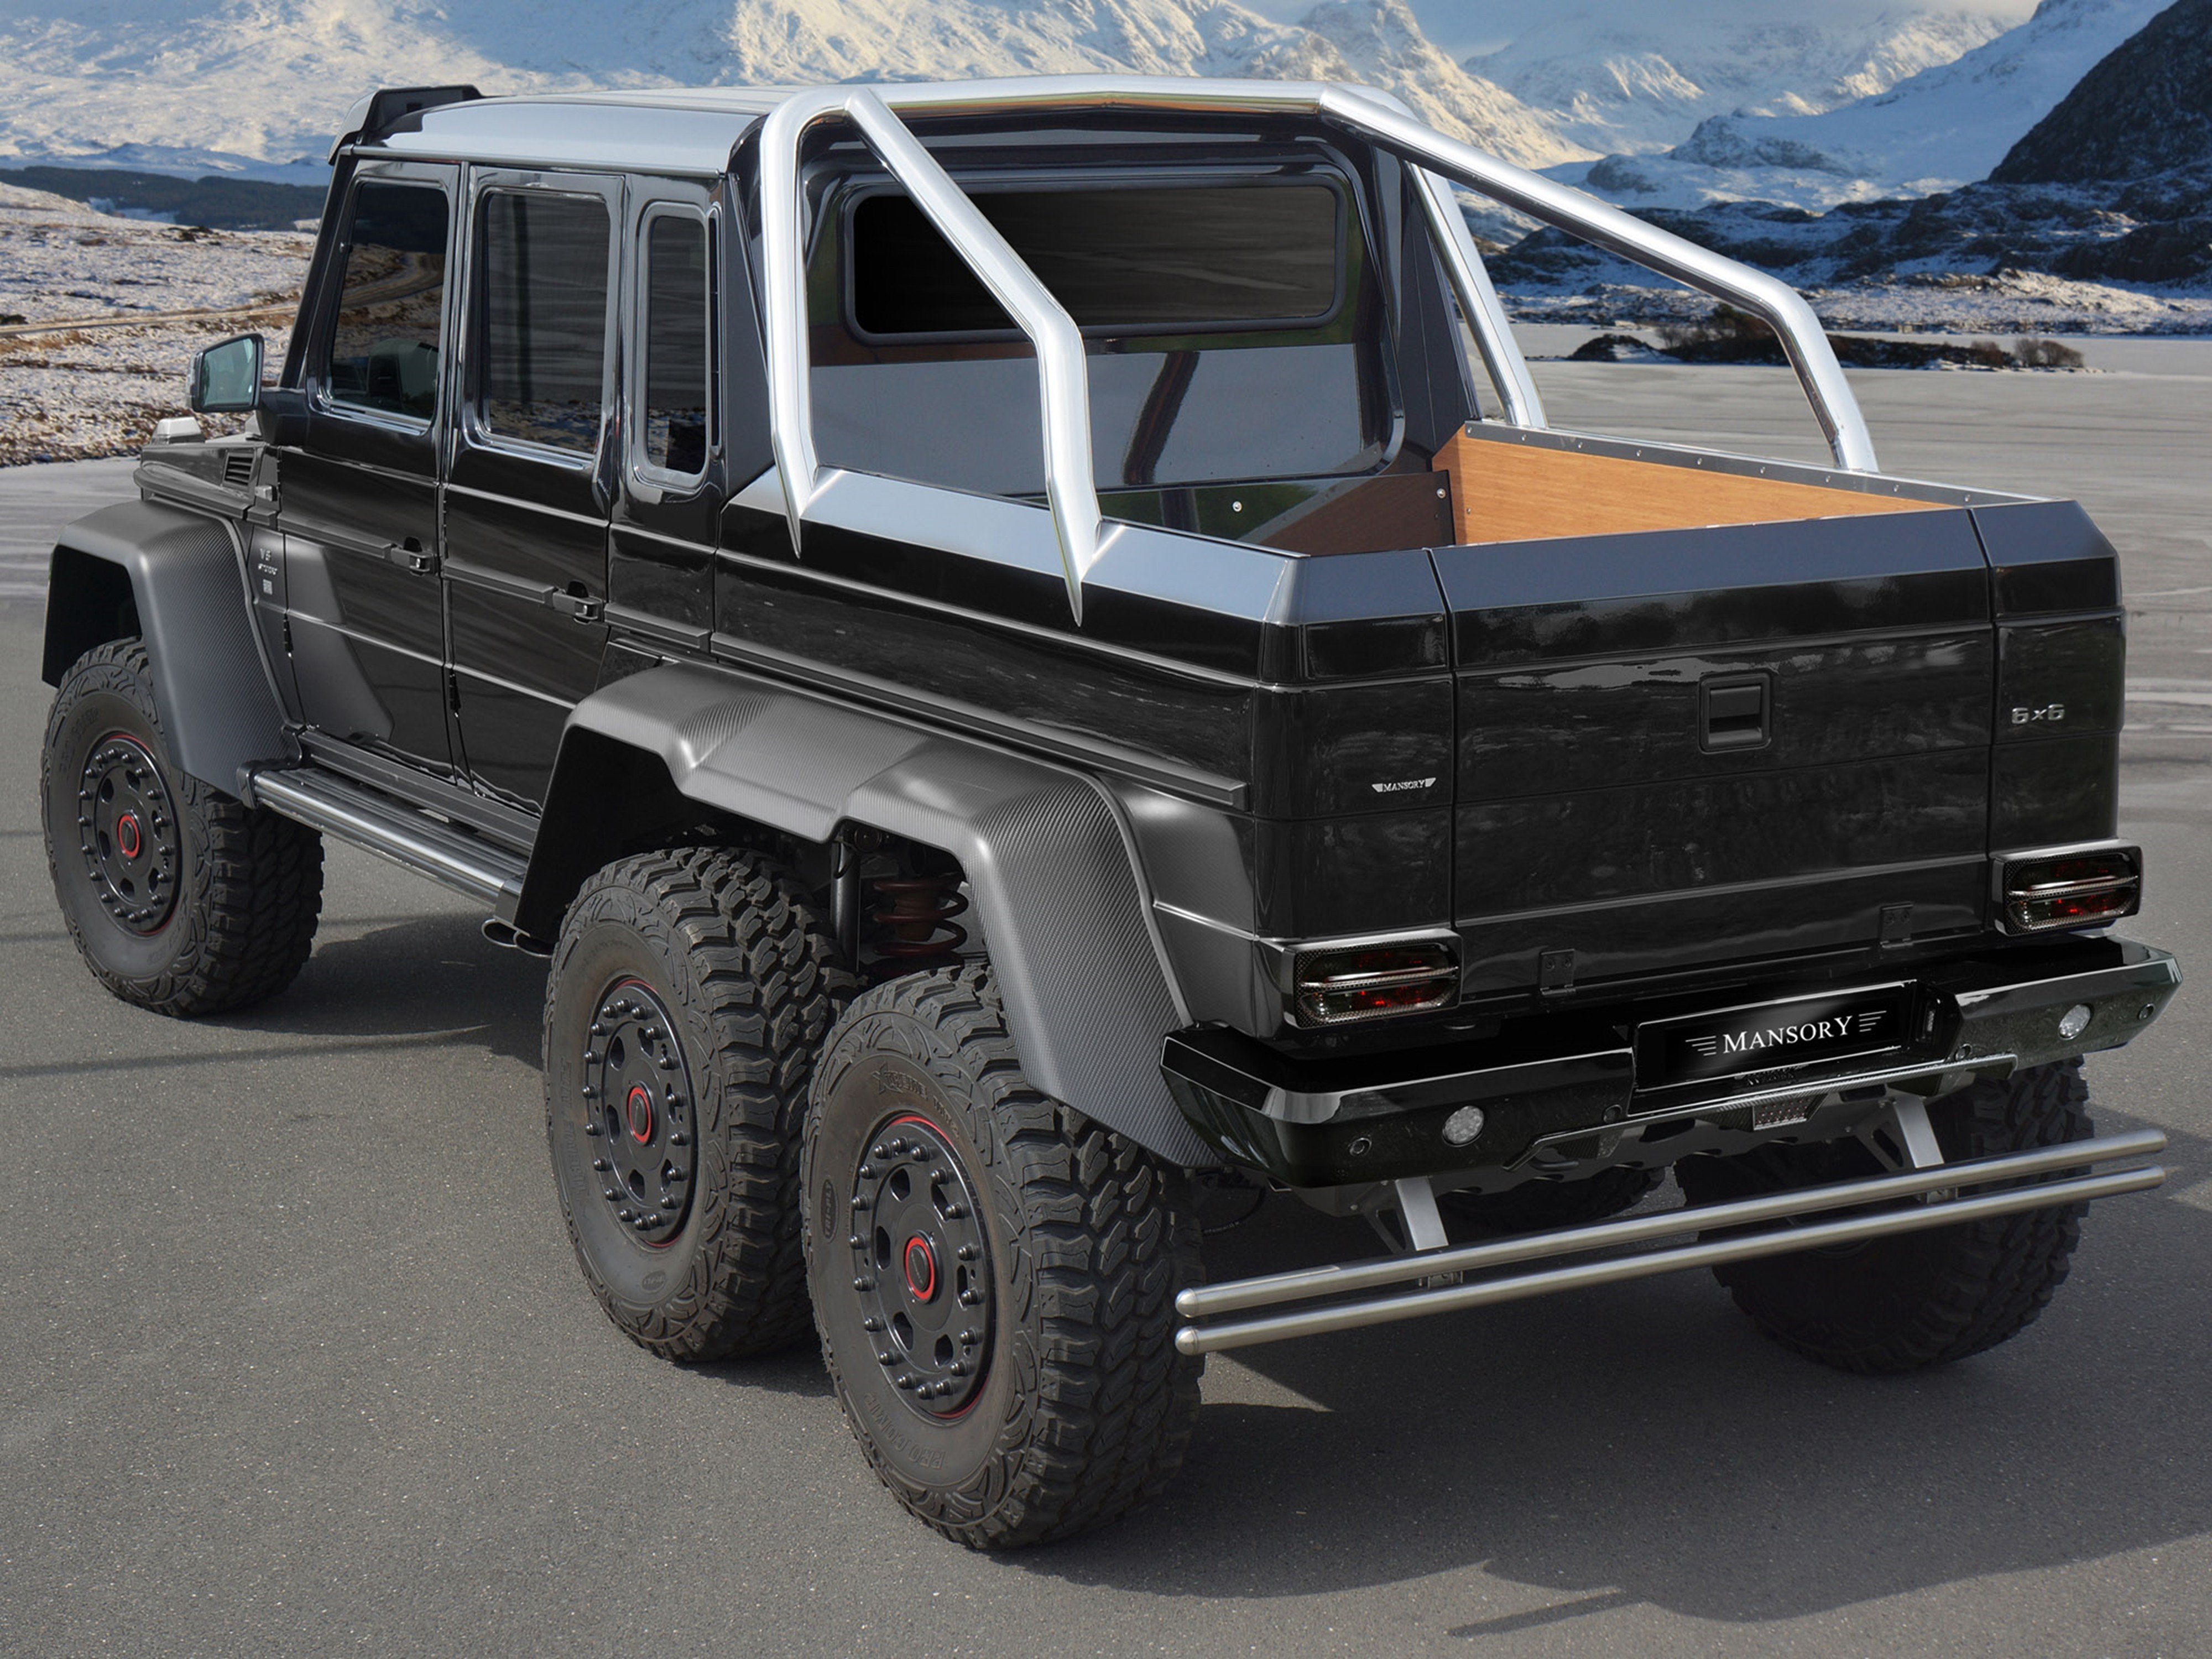 mansory, Amg, Mercedes benz, G class, Tunning, Off road, Car, Germany, 6x6 2014, 4000x3000 Wallpaper